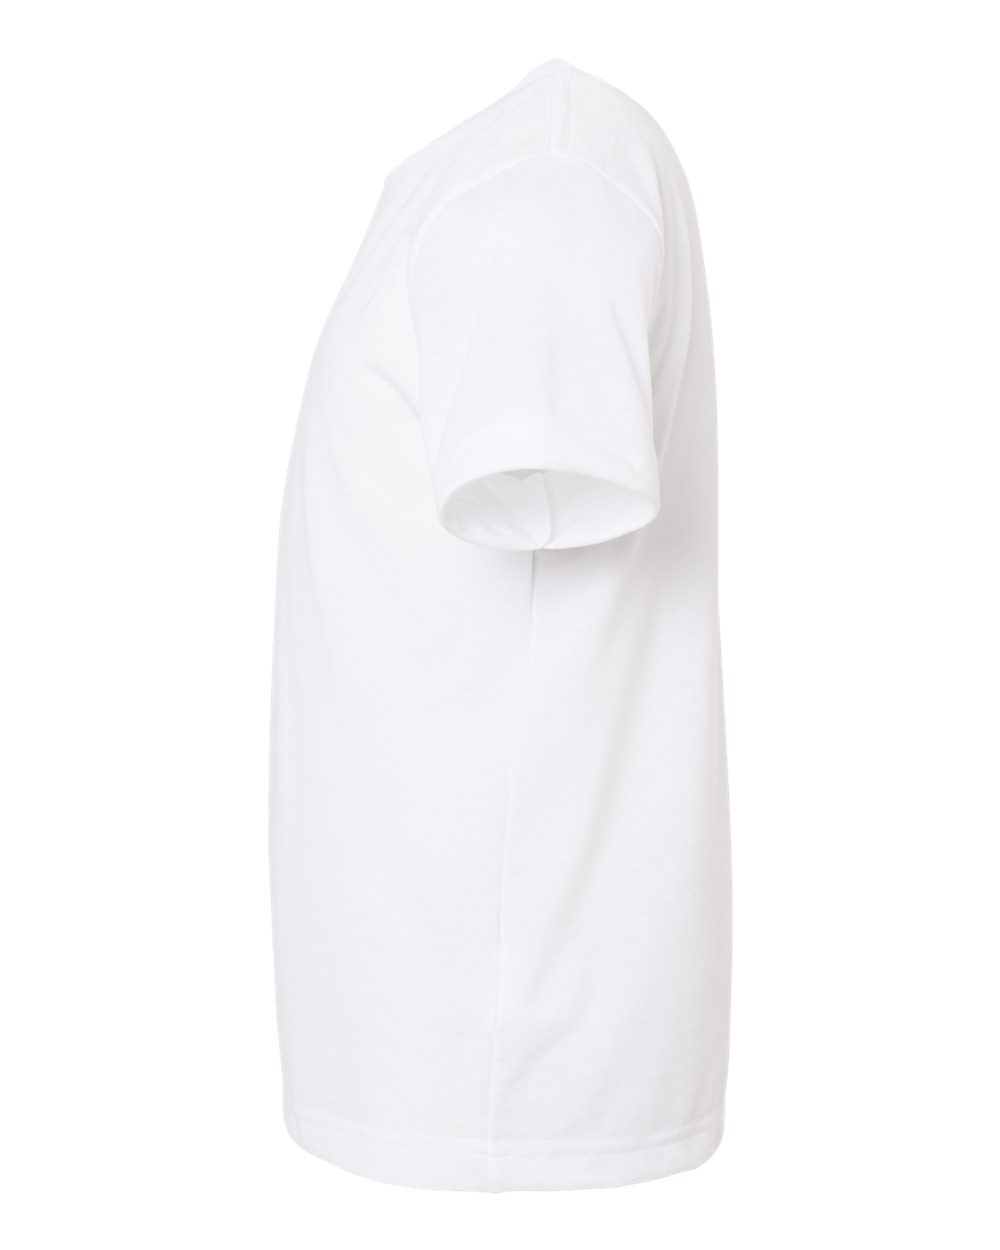 1210 Youth Sublimation White Polyester T-shirt - SubliVie